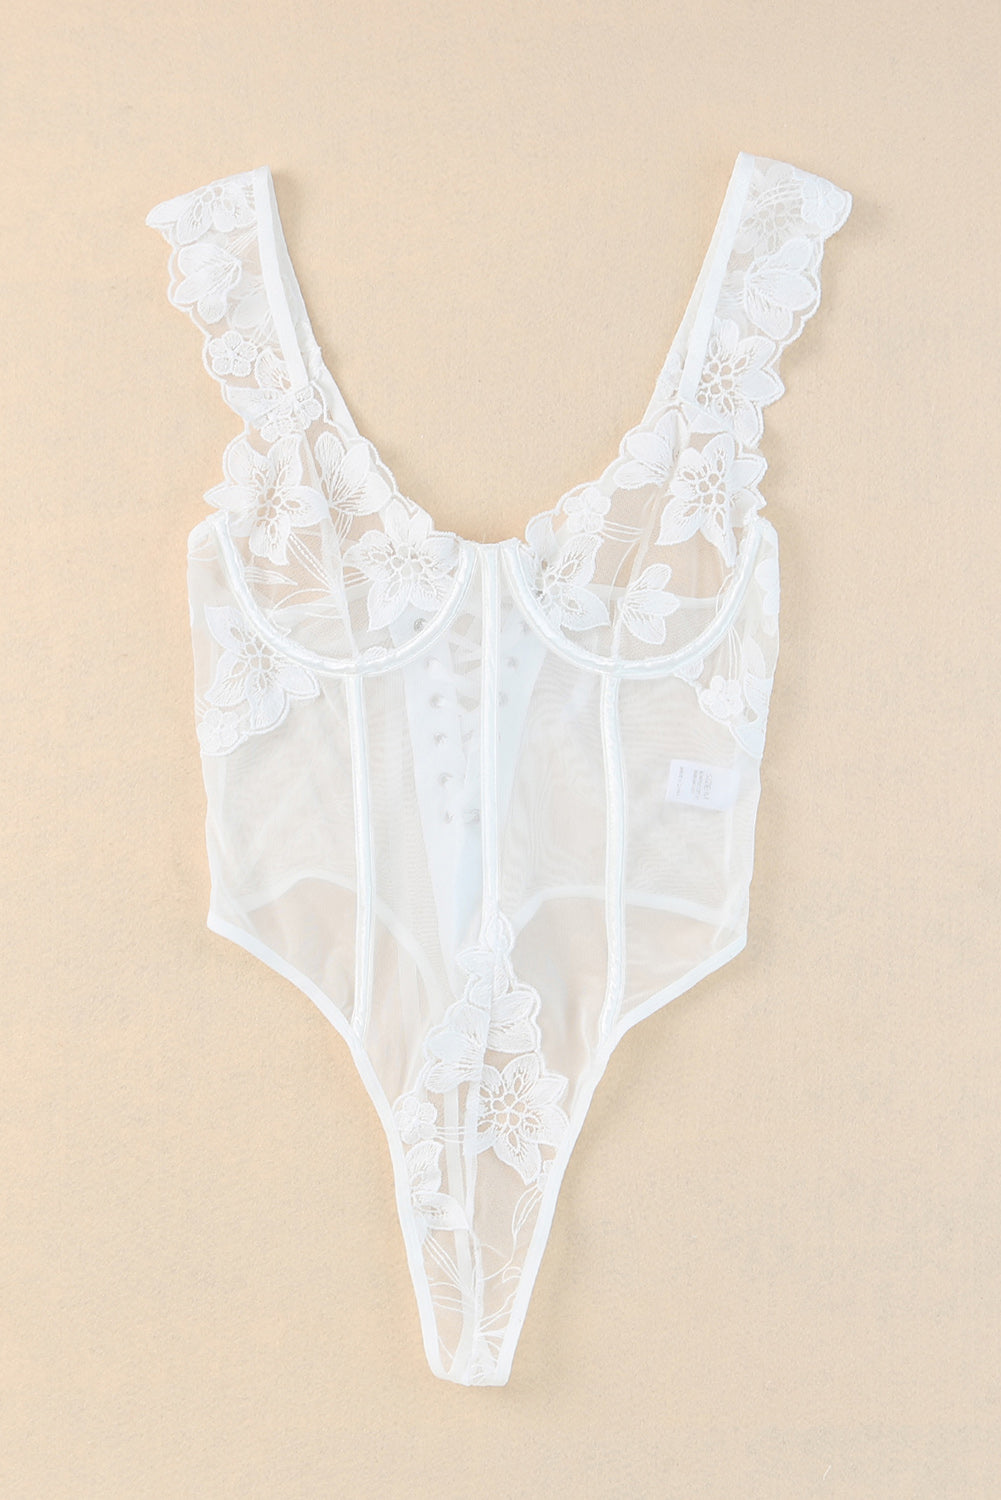 White Lily Floral Embroider Sheer Lace Up Teddy Teddy Lingerie JT's Designer Fashion